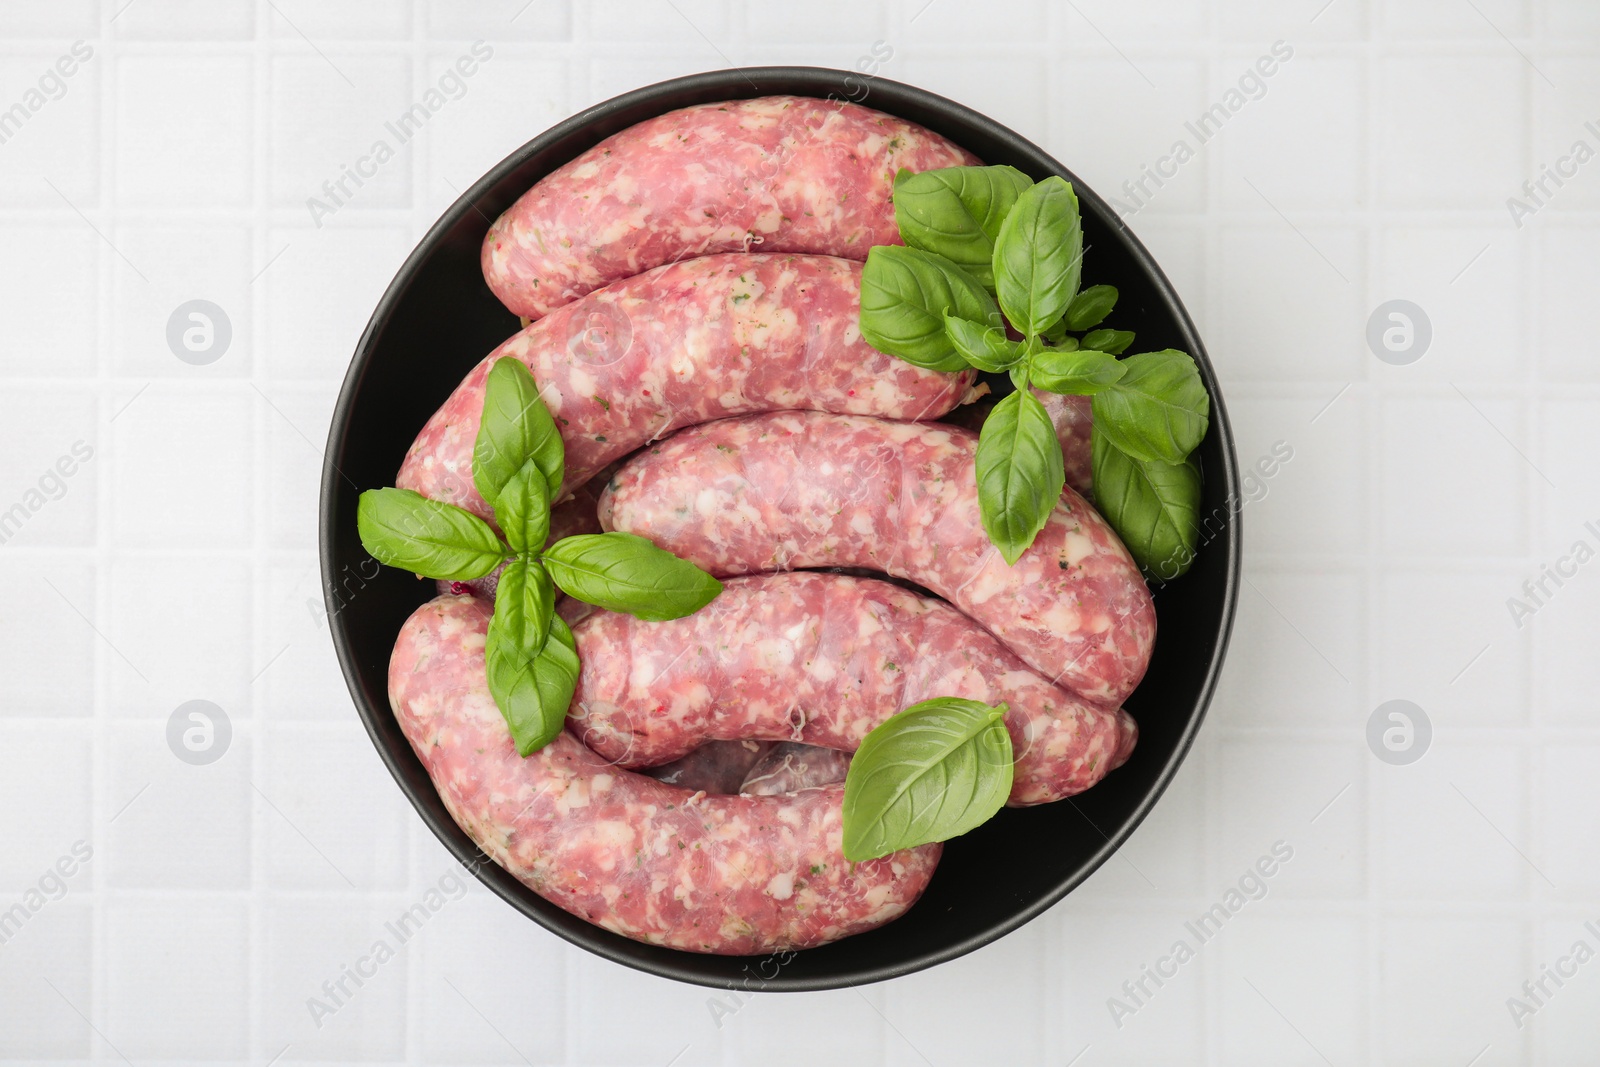 Photo of Raw homemade sausages and basil leaves on white tiled table, top view